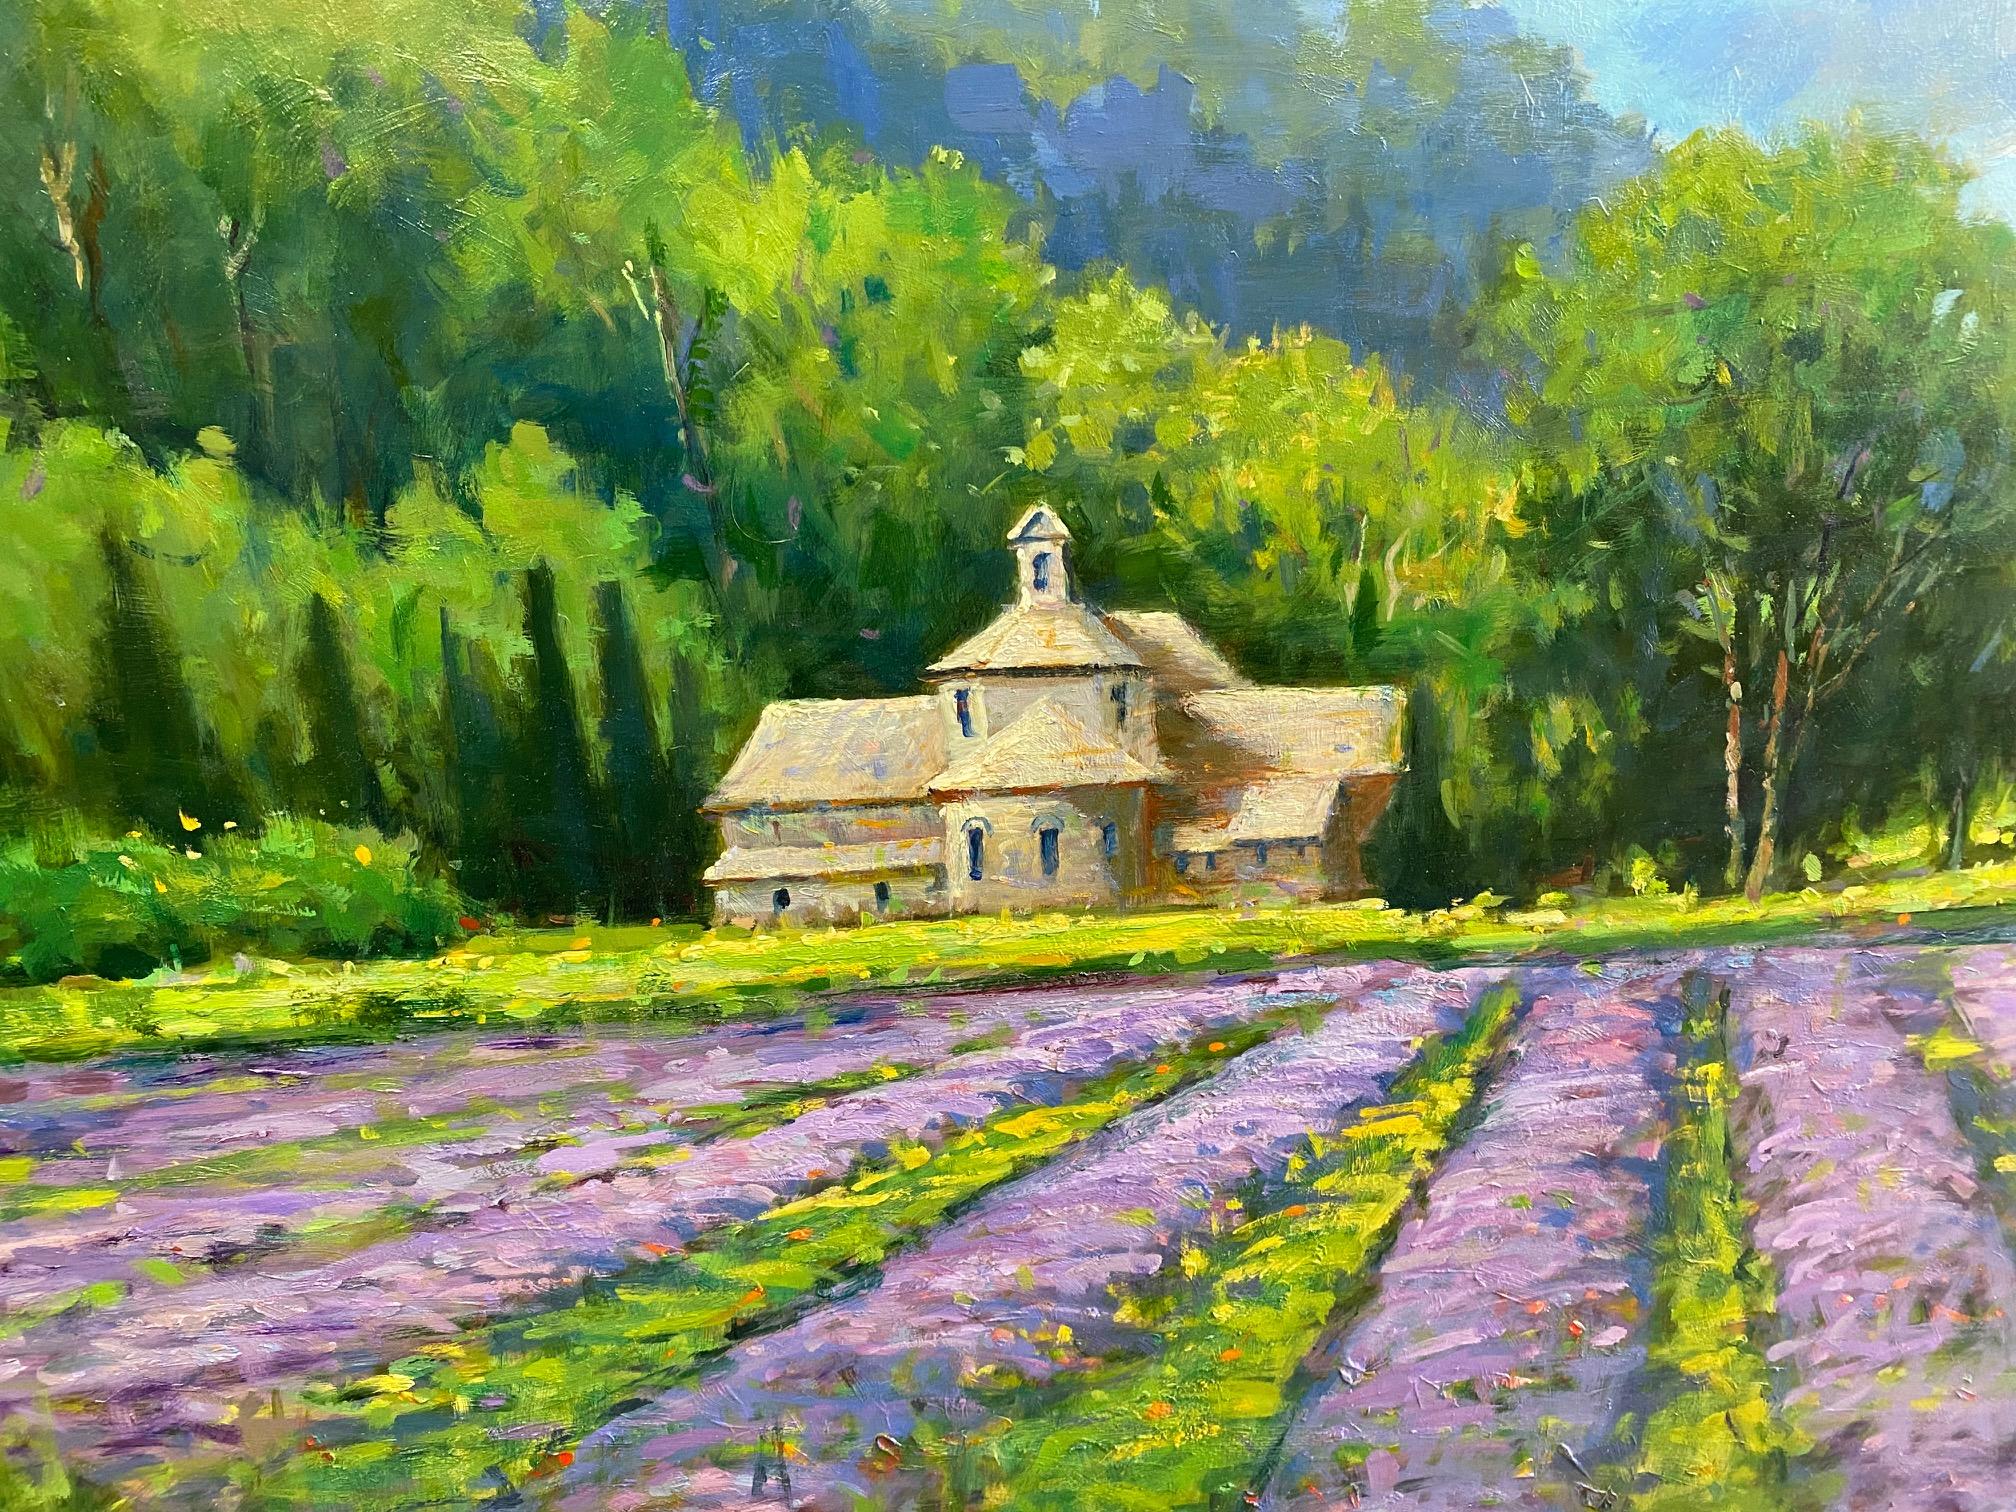 You arrive in the famed Provence of France to find the storied lavender fields in Gordes in full bloom.  No surprise that many a French Impressionist selected Gordes for their home base in Provence having expected it to be another painting excursion